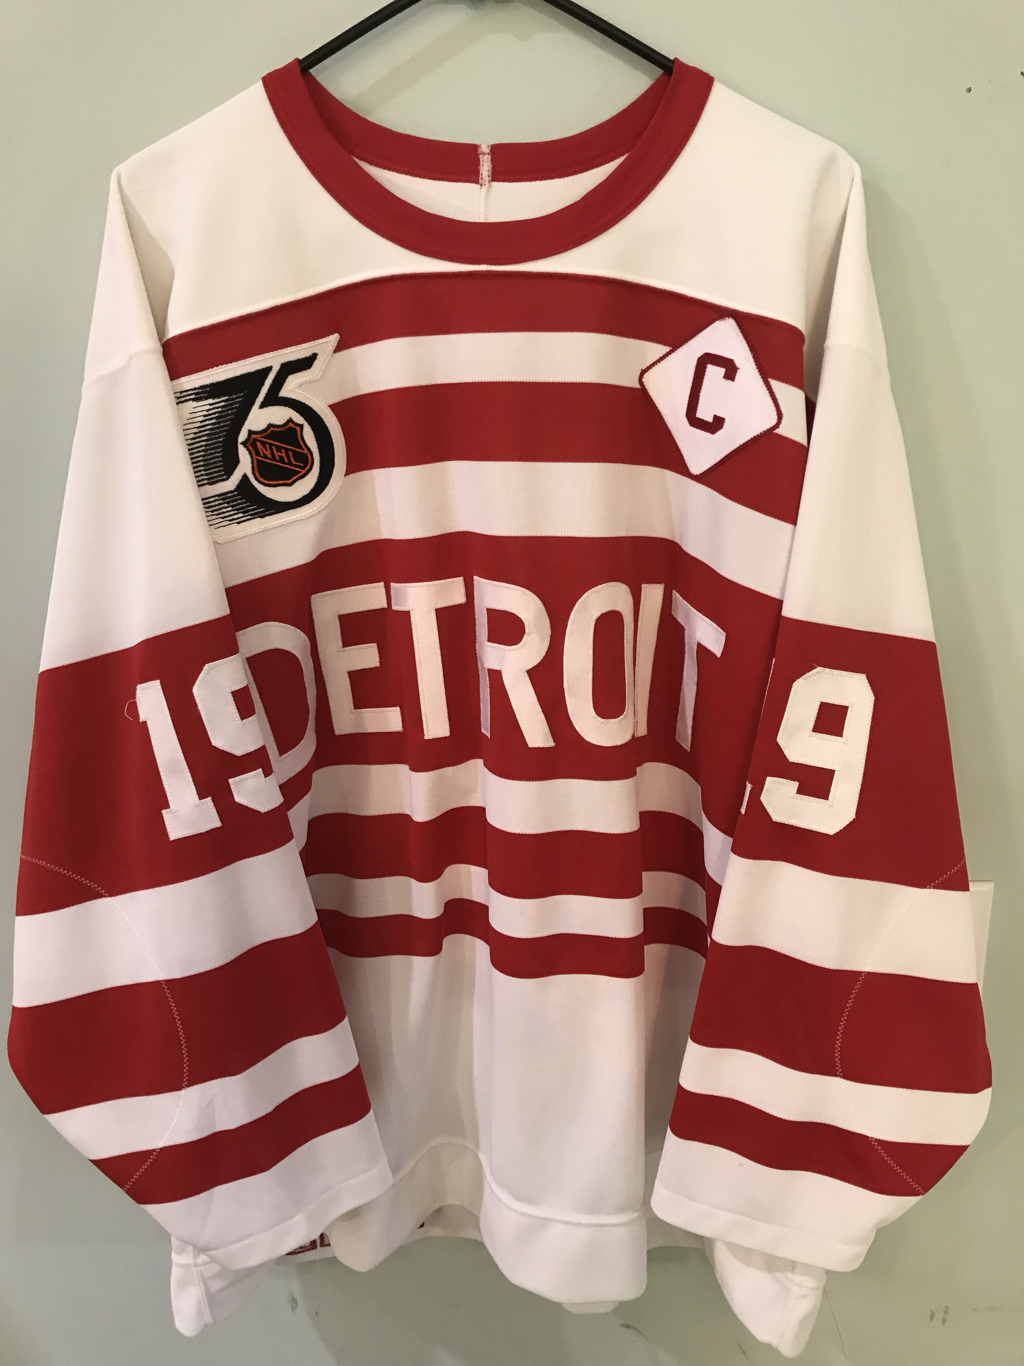 Detroit Red Wings 1991-92 TBTC F, 1991-92 NHL Detriot Red W…